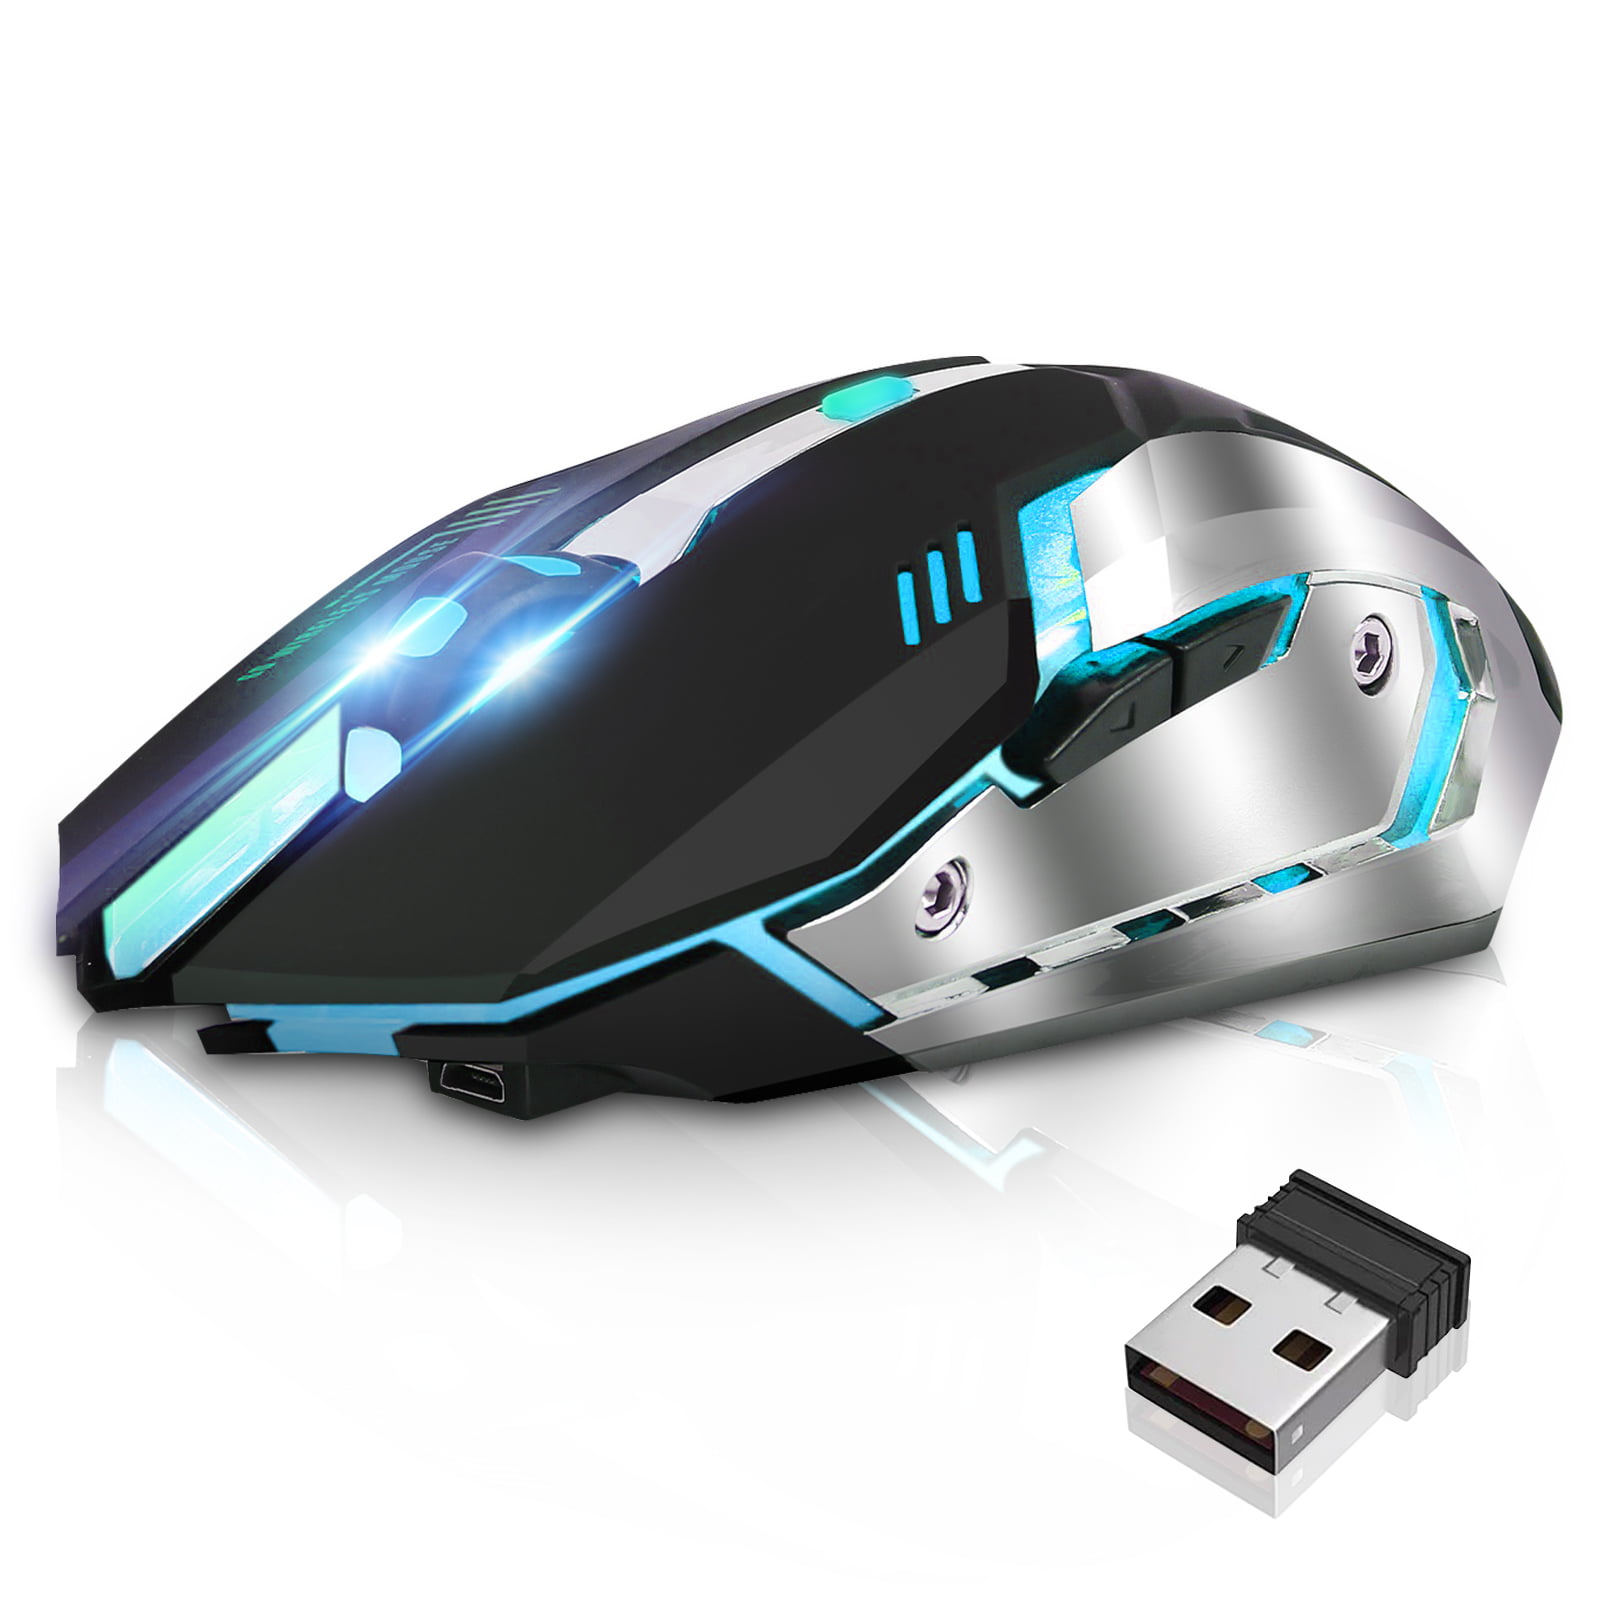 White Light Up Computer PC USB Mouse Used for Games and Office 4 Adjustable DPI Levels 6 Programmable Buttons and 4 Circular & Breathing LED Light LINGYI Wired Gaming Mouse 